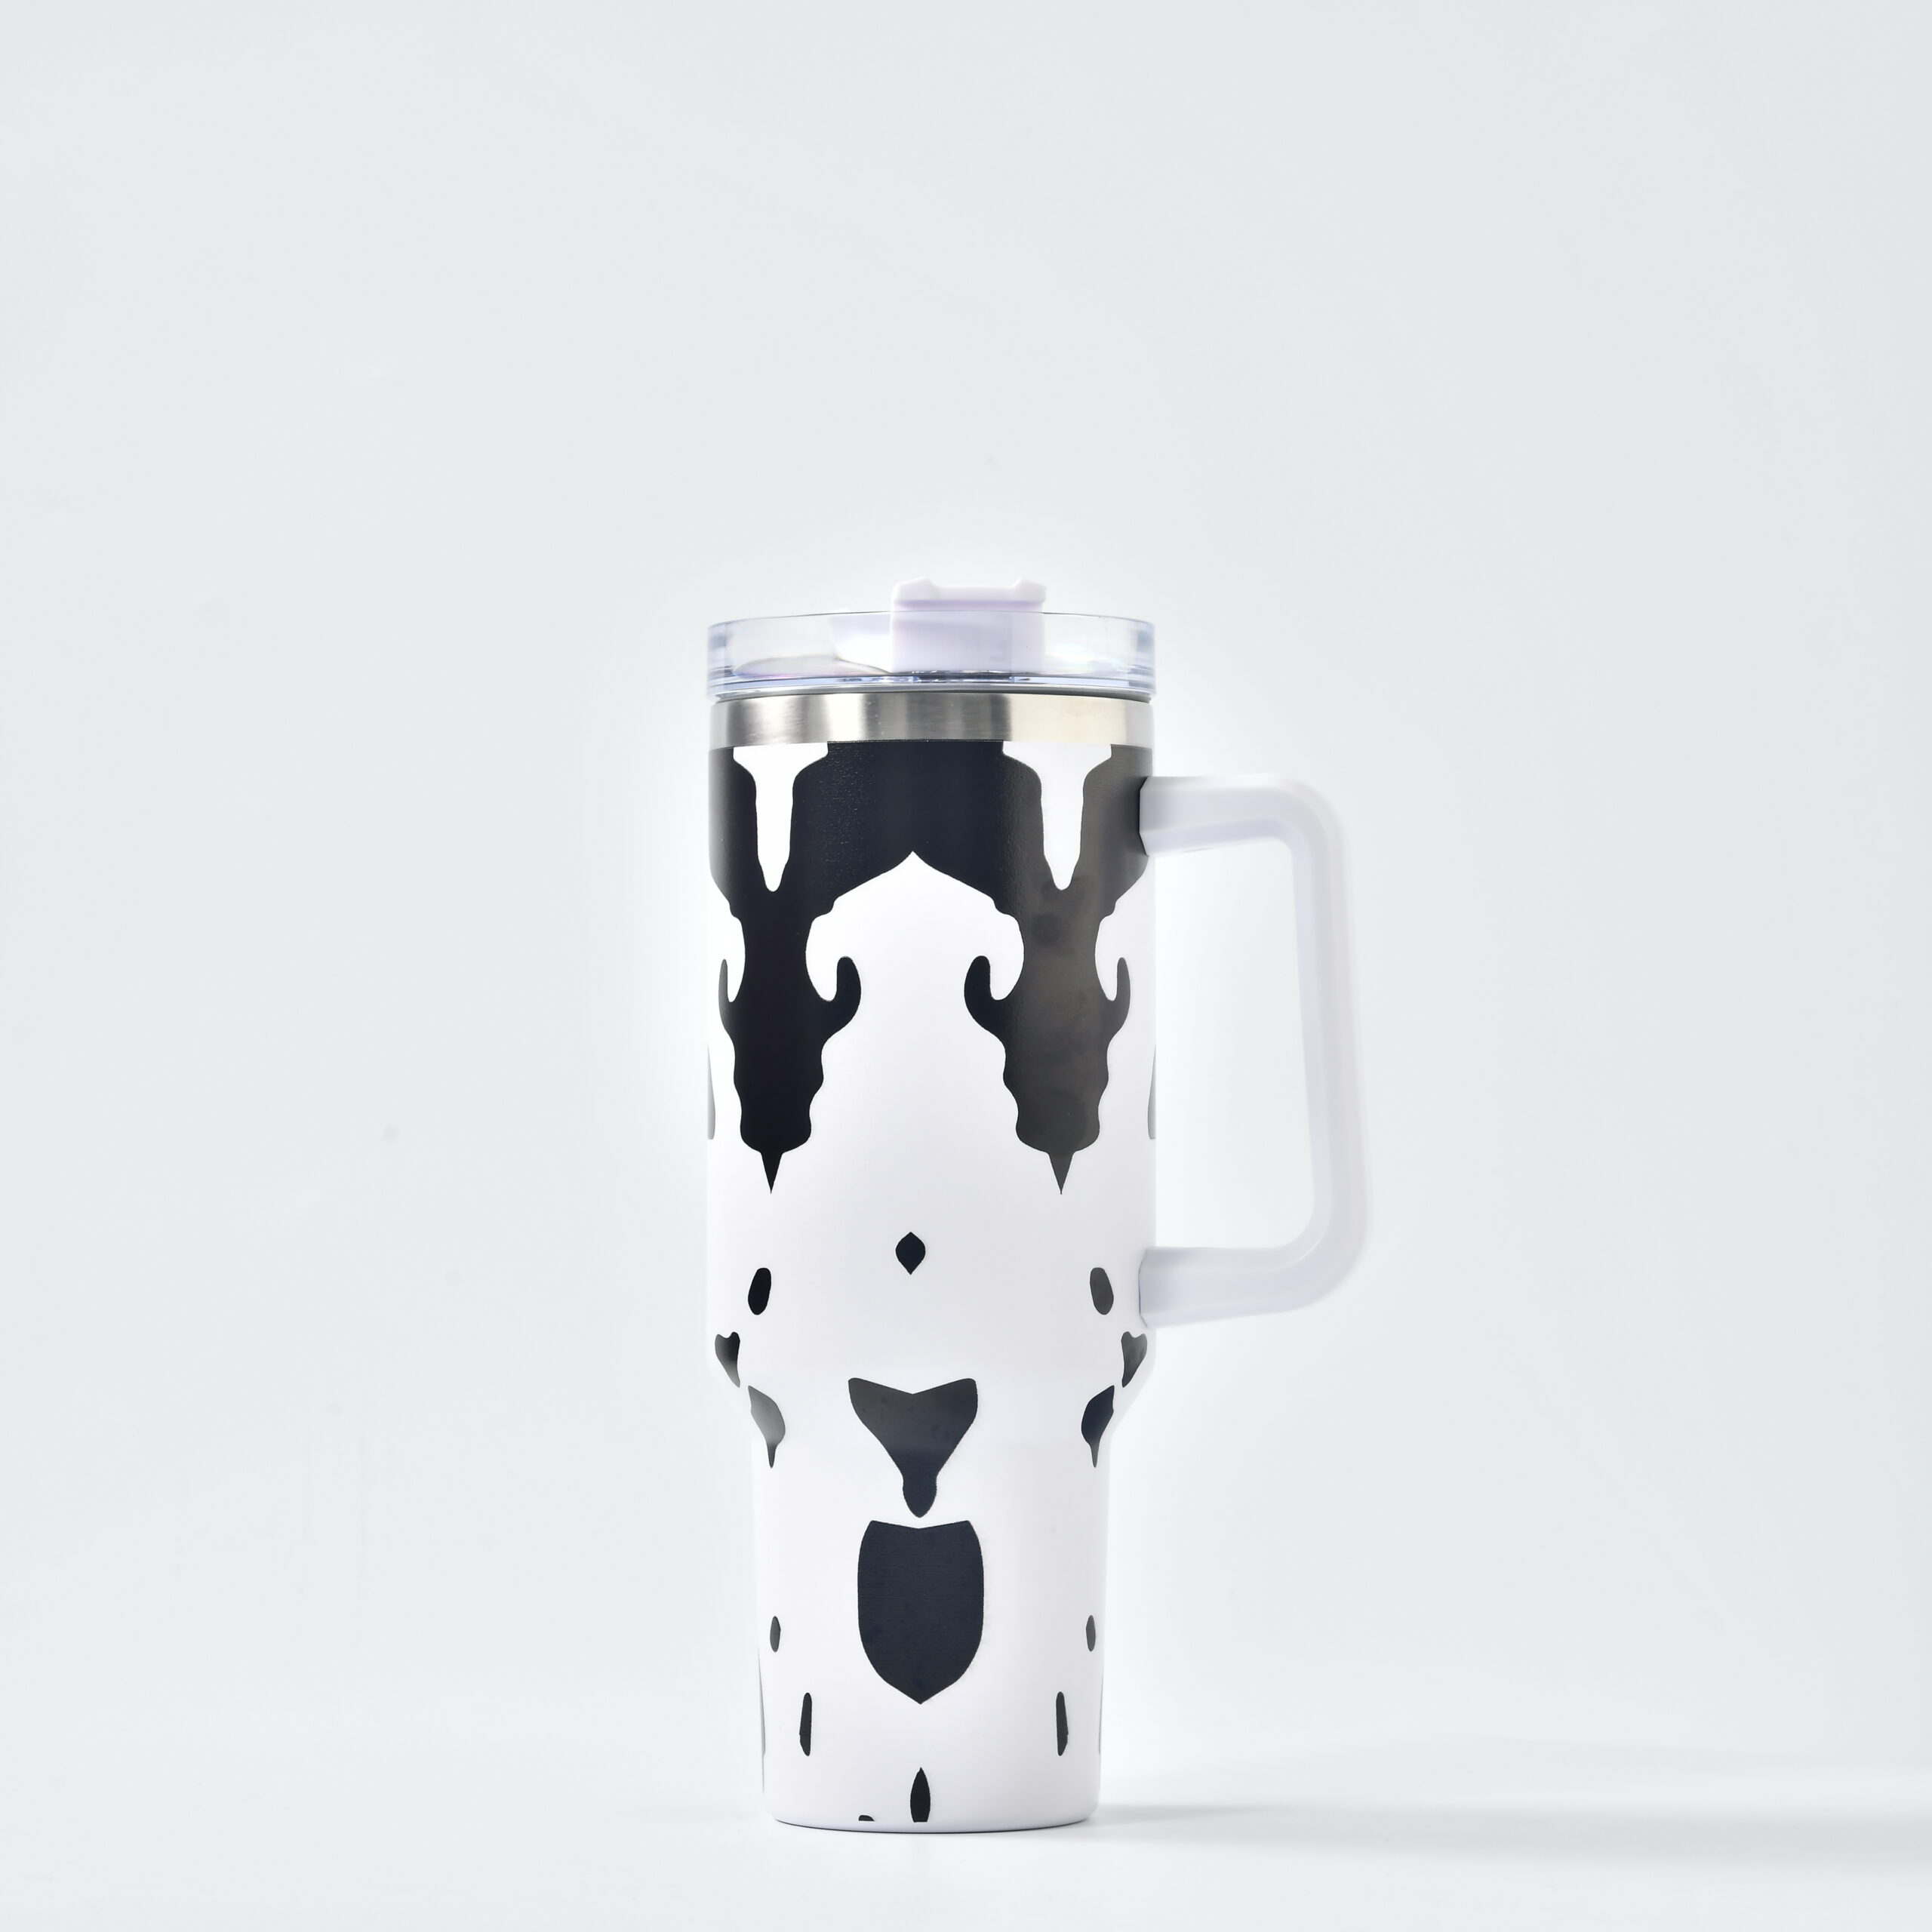 Cow Print Tumbler, 40 Oz Tumbler with Handle and Straw, Cute Cow